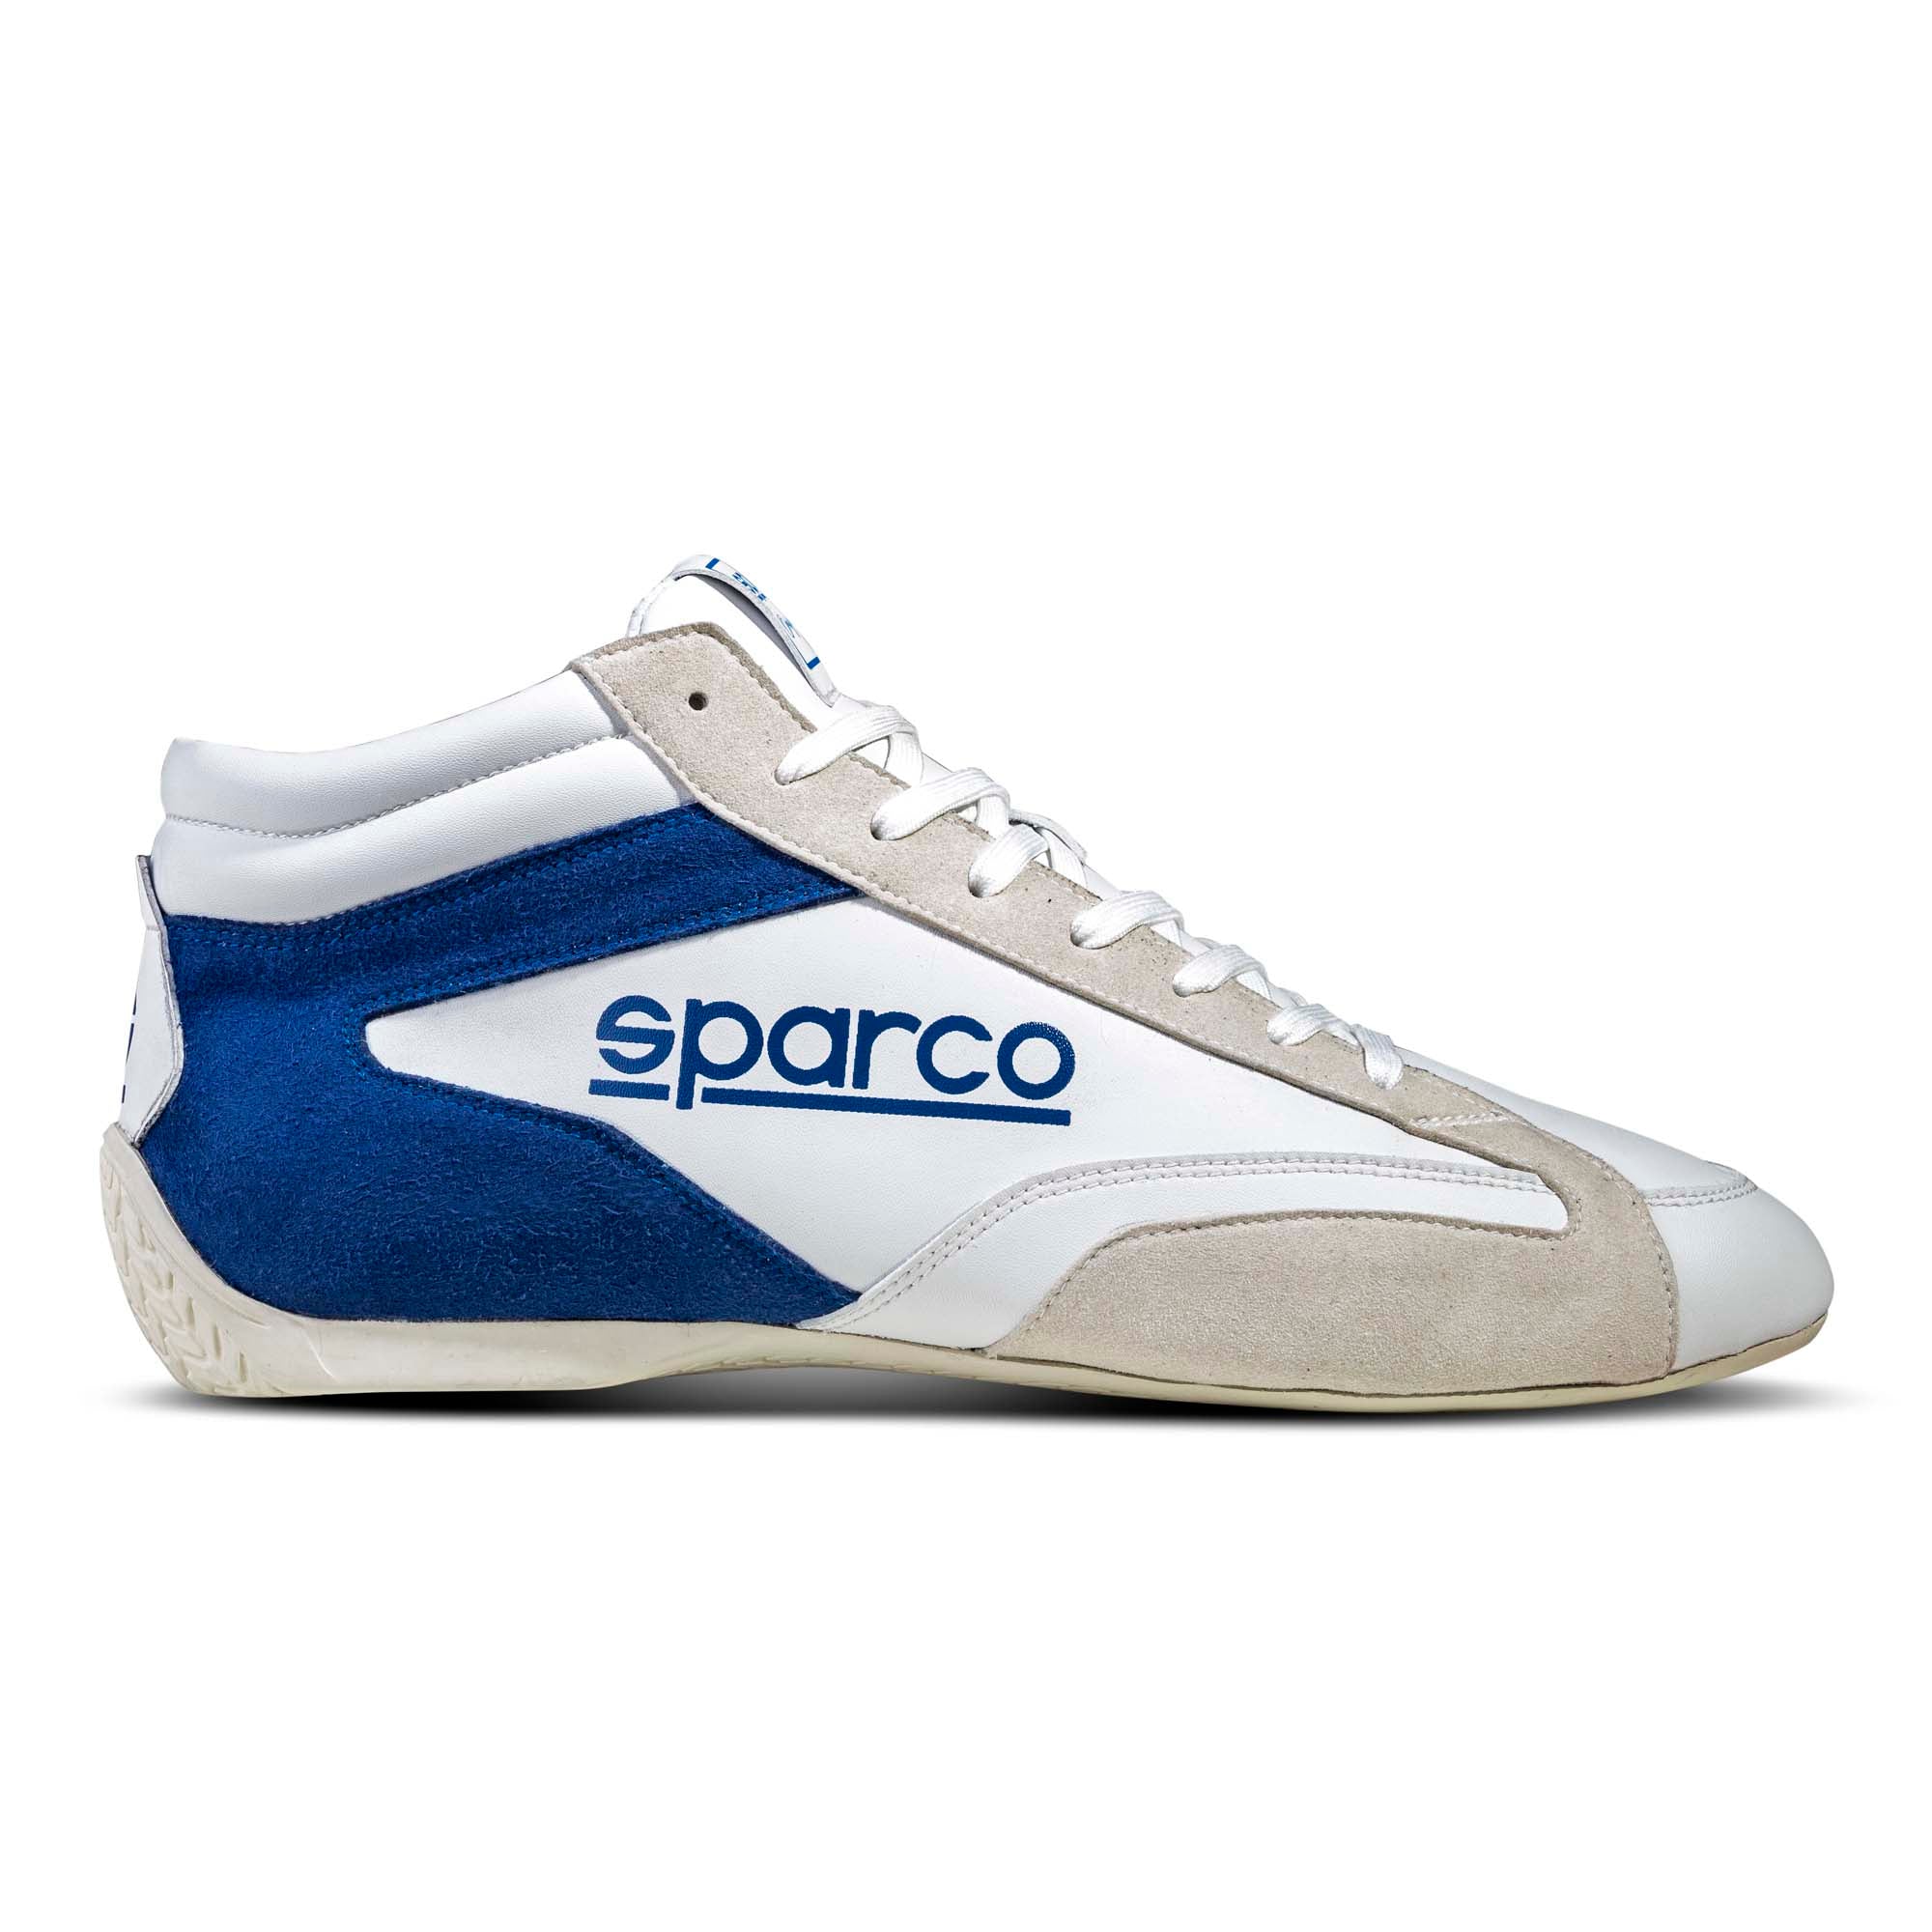 Sparco S-Drive Mid Shoes